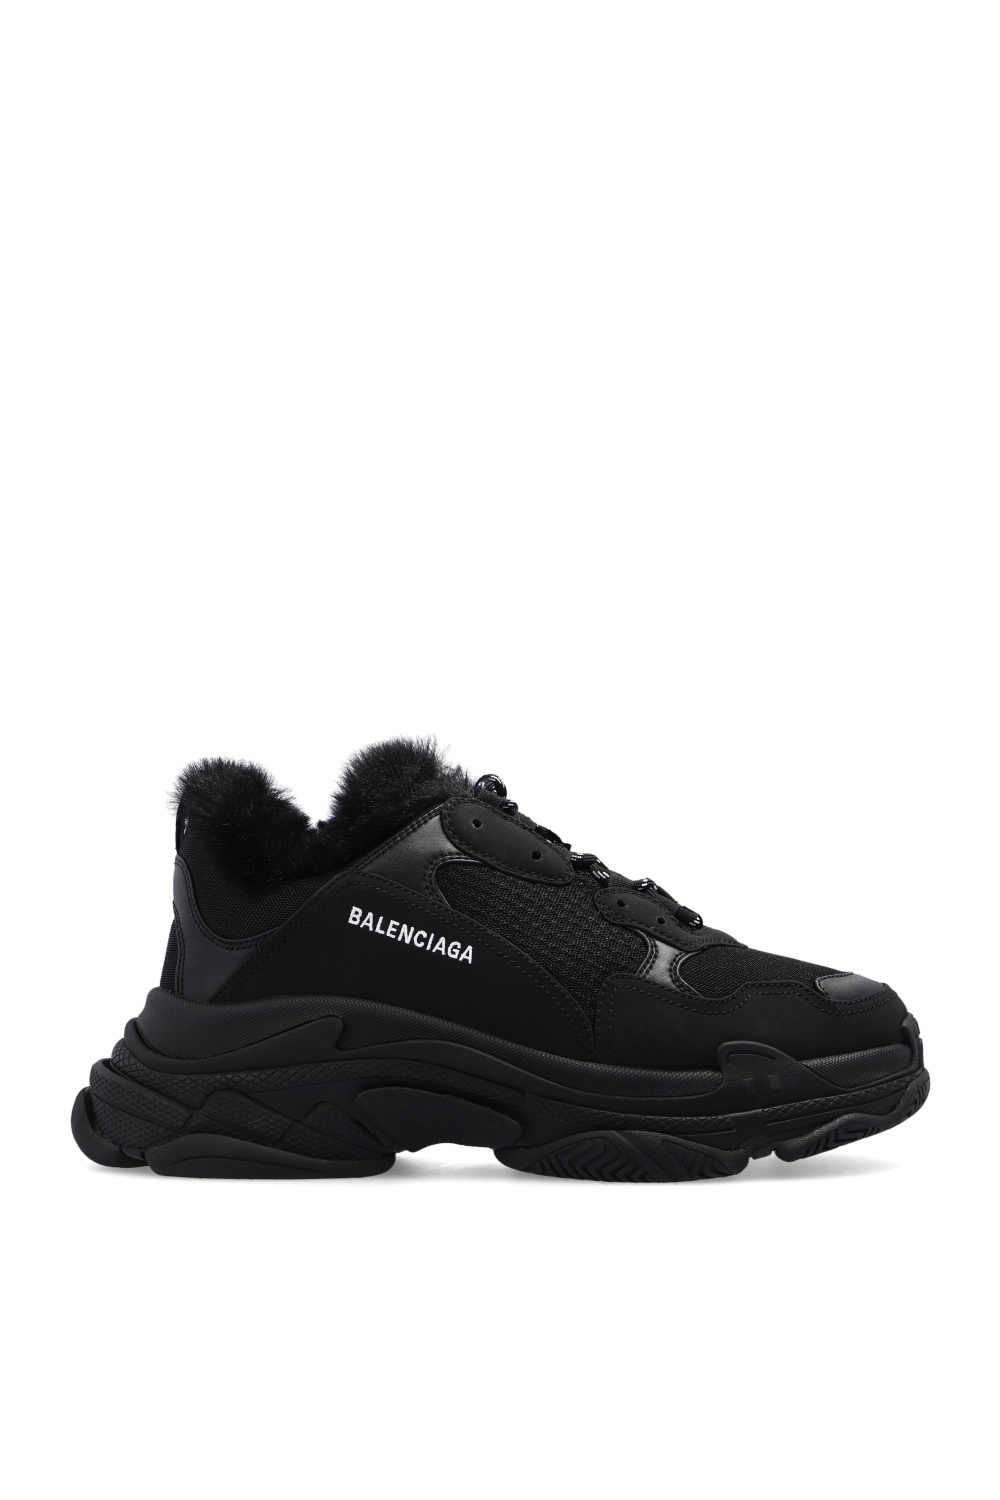 up sneakers Balenciaga  Oh My Sandals 4646 Roble Combi Mujer Cuero   Triple S lace  IetpShops Namibia